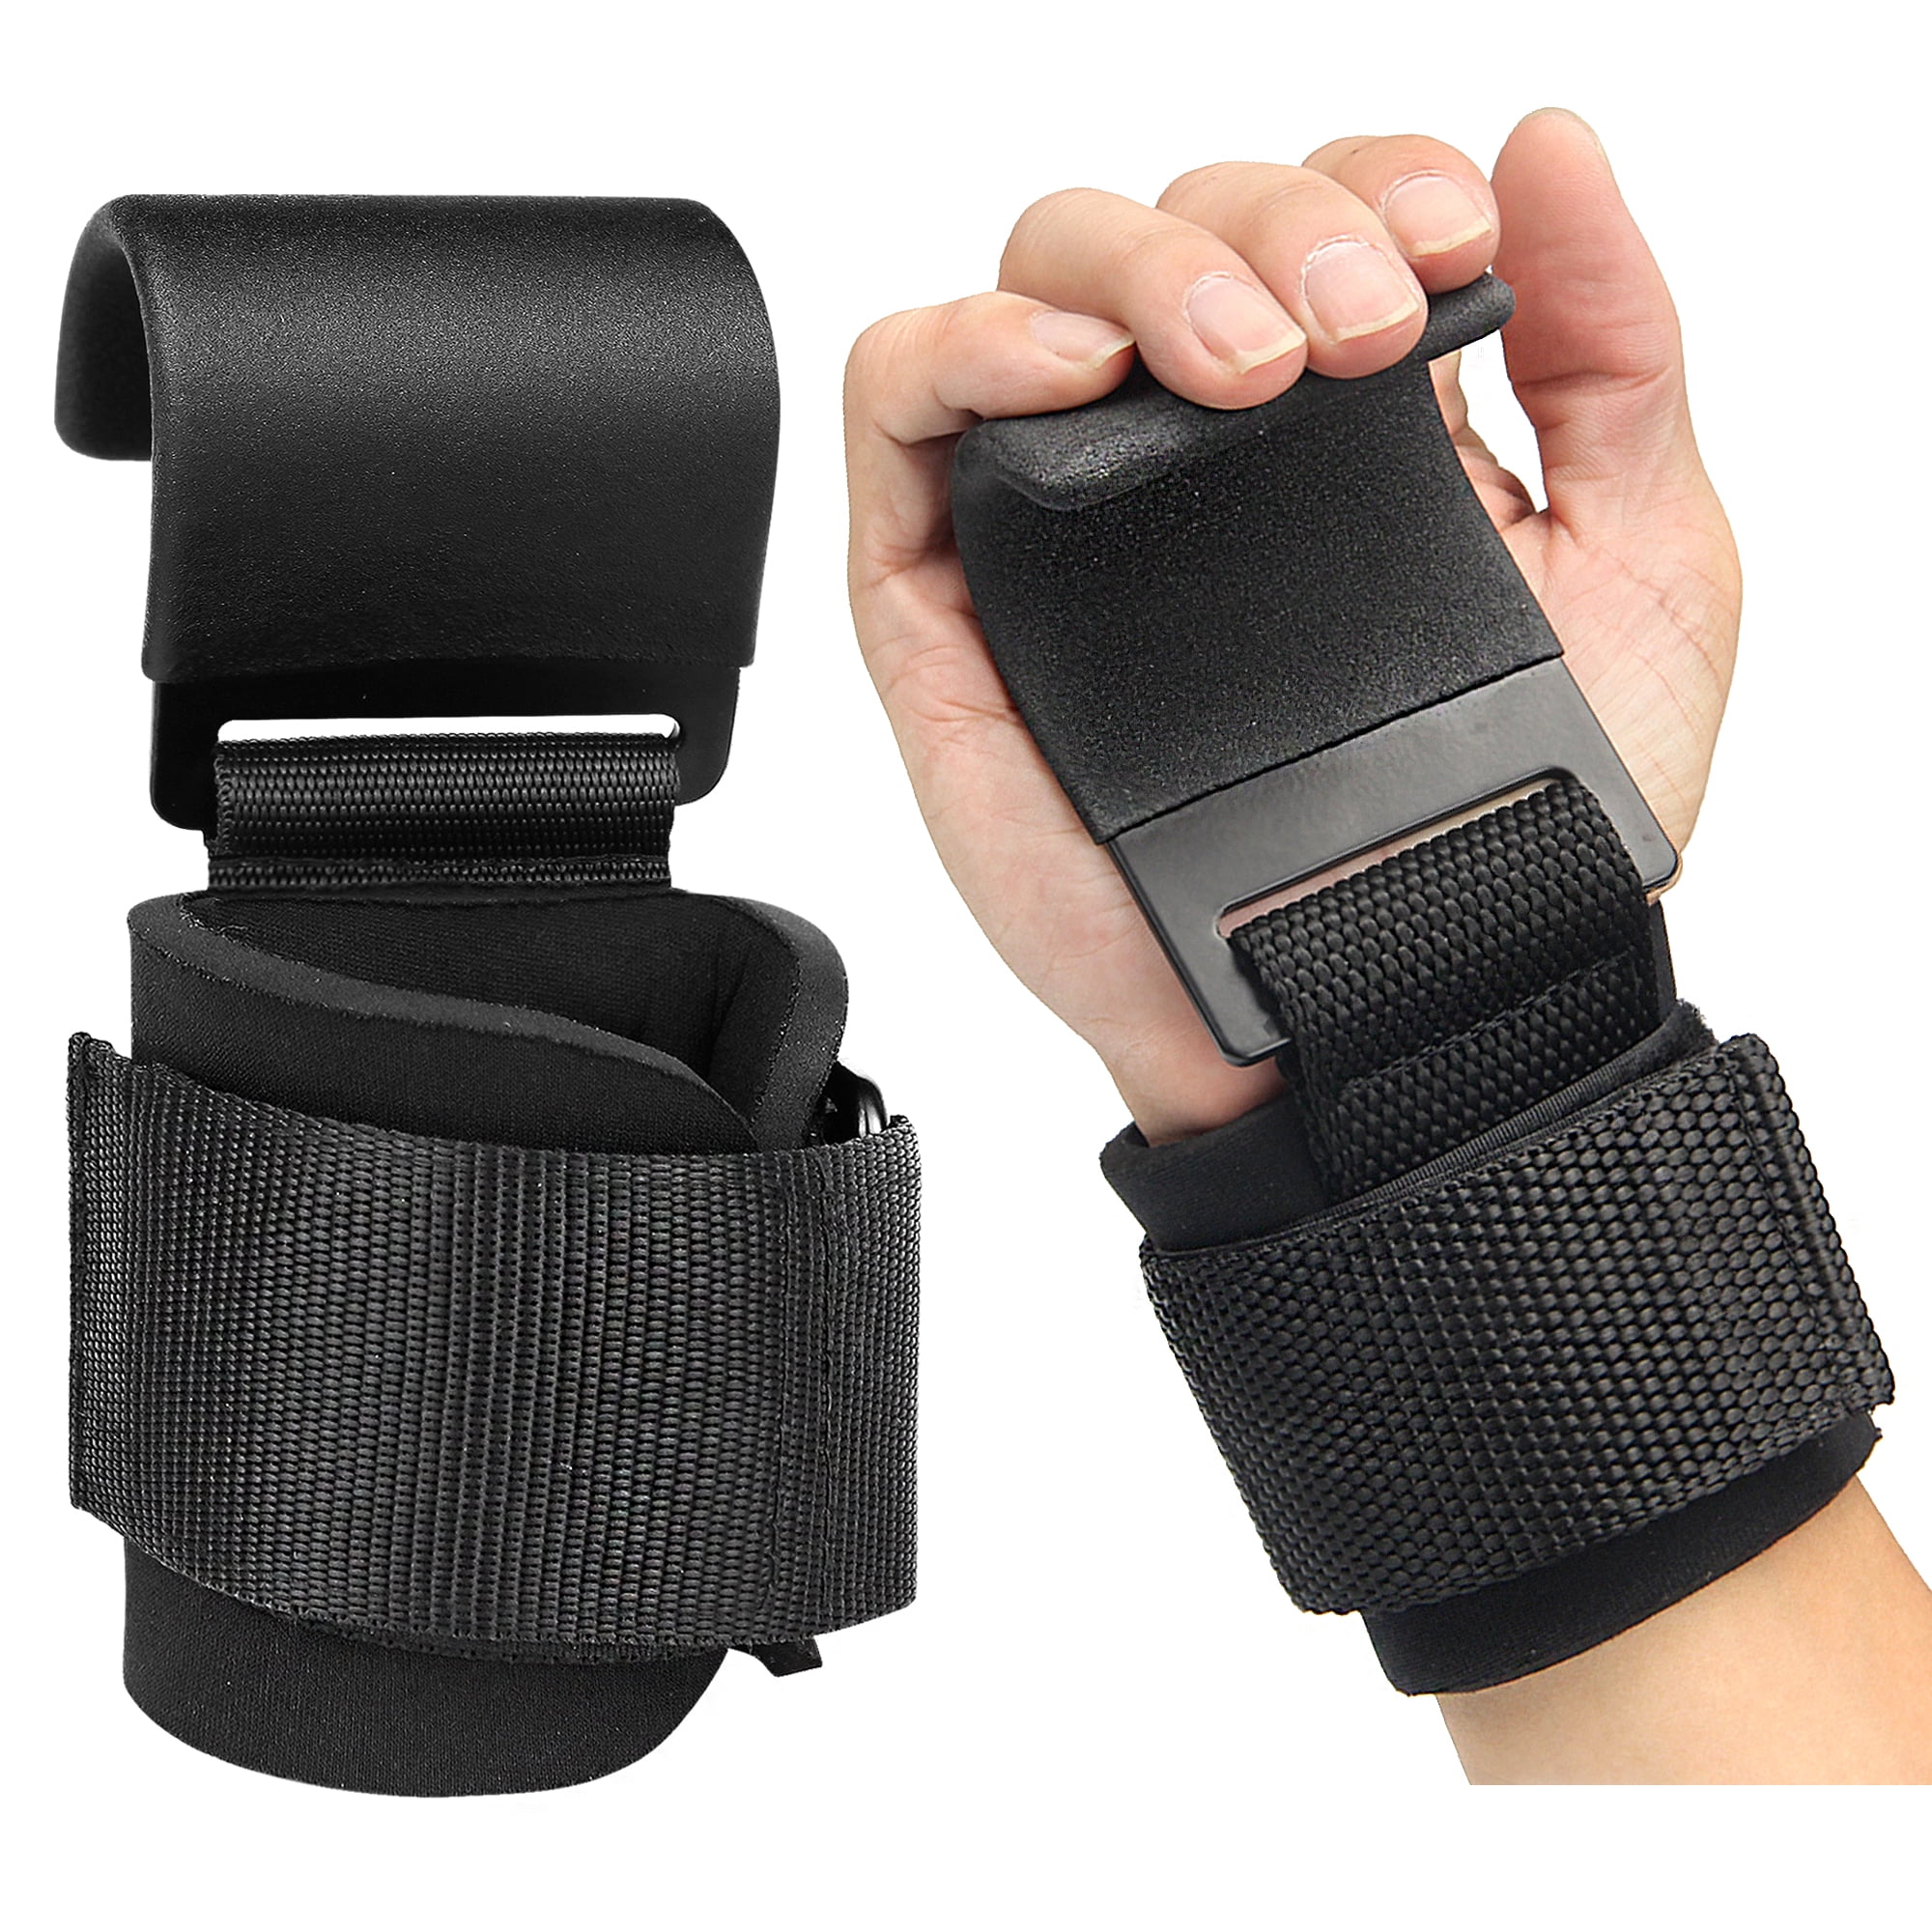 Weight Lifting Hooks Grips Straps Wrist Support Gym Training Power Lifting Wraps 